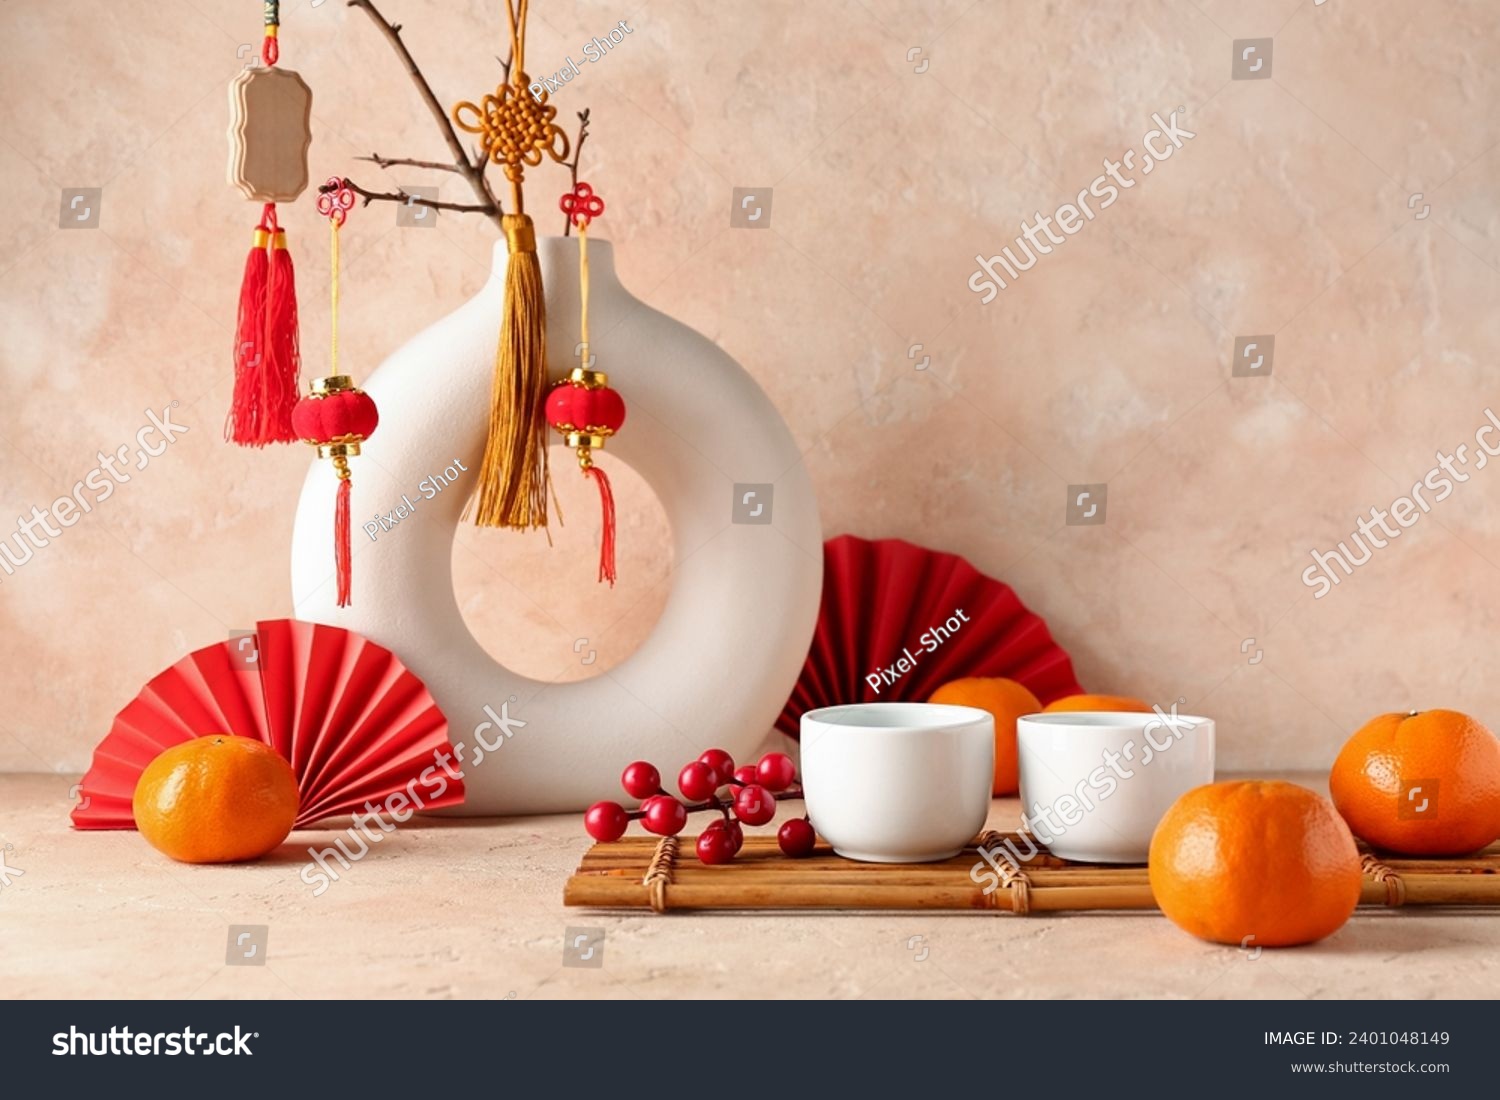 Vase with oriental symbols, cups and mandarins on table against beige grunge background. New Year celebration #2401048149